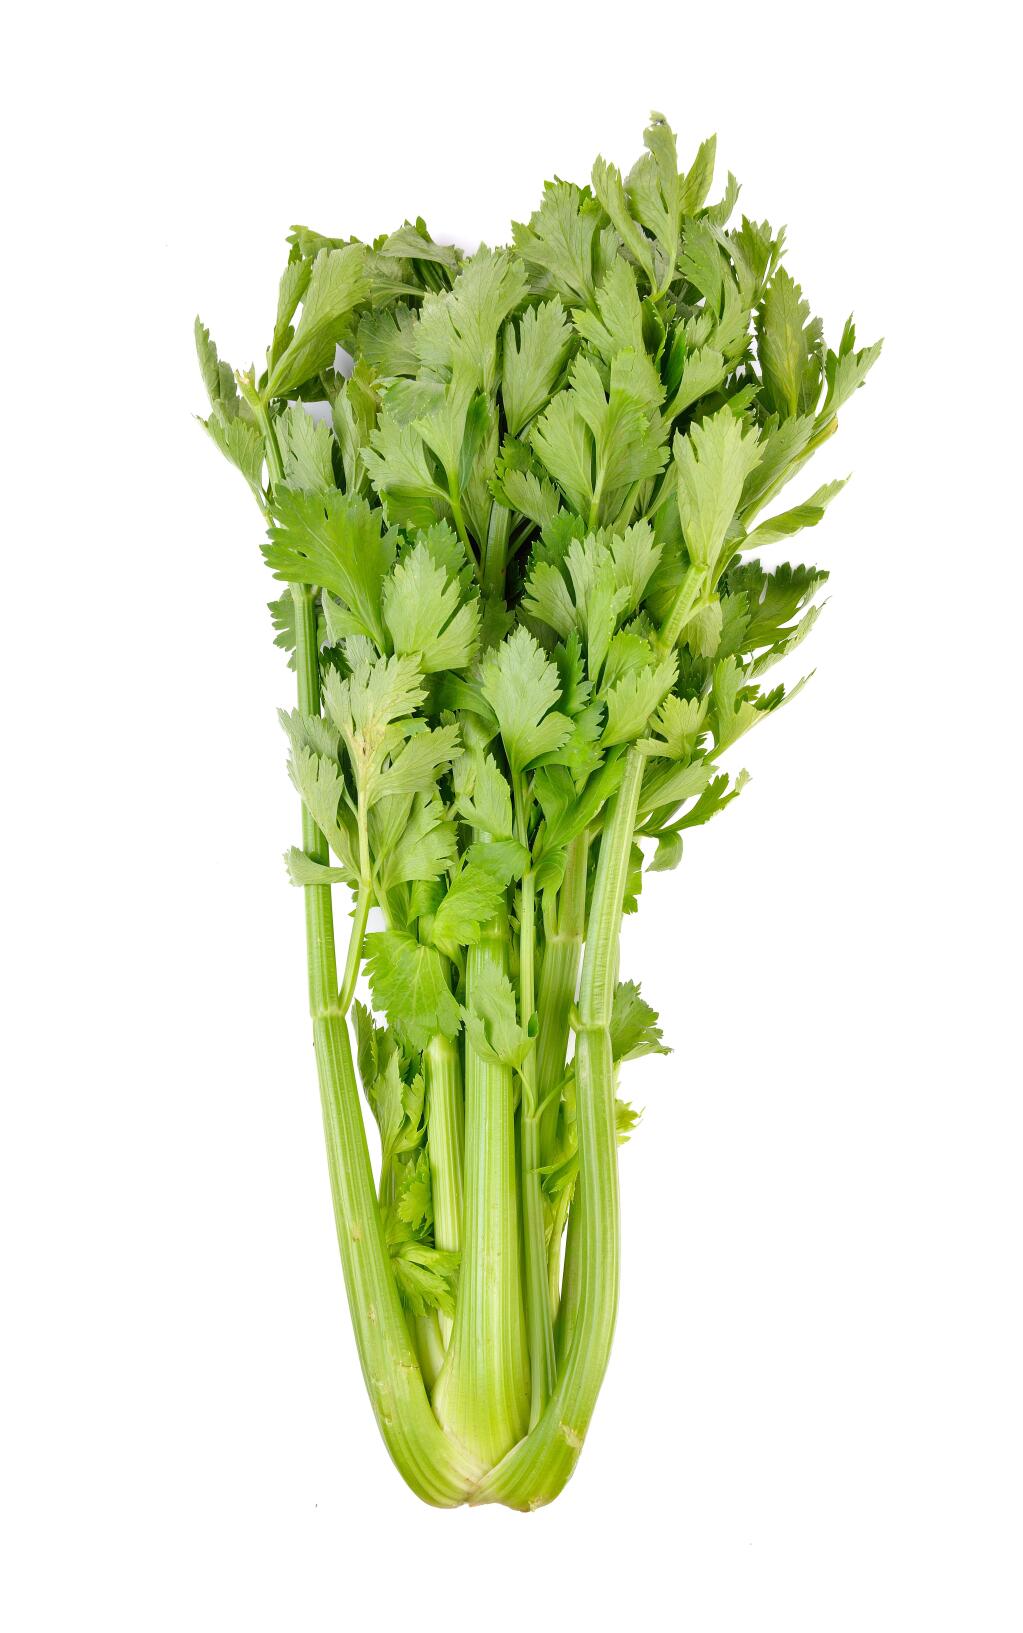 Celery can be sauteedfor a simple side dish.